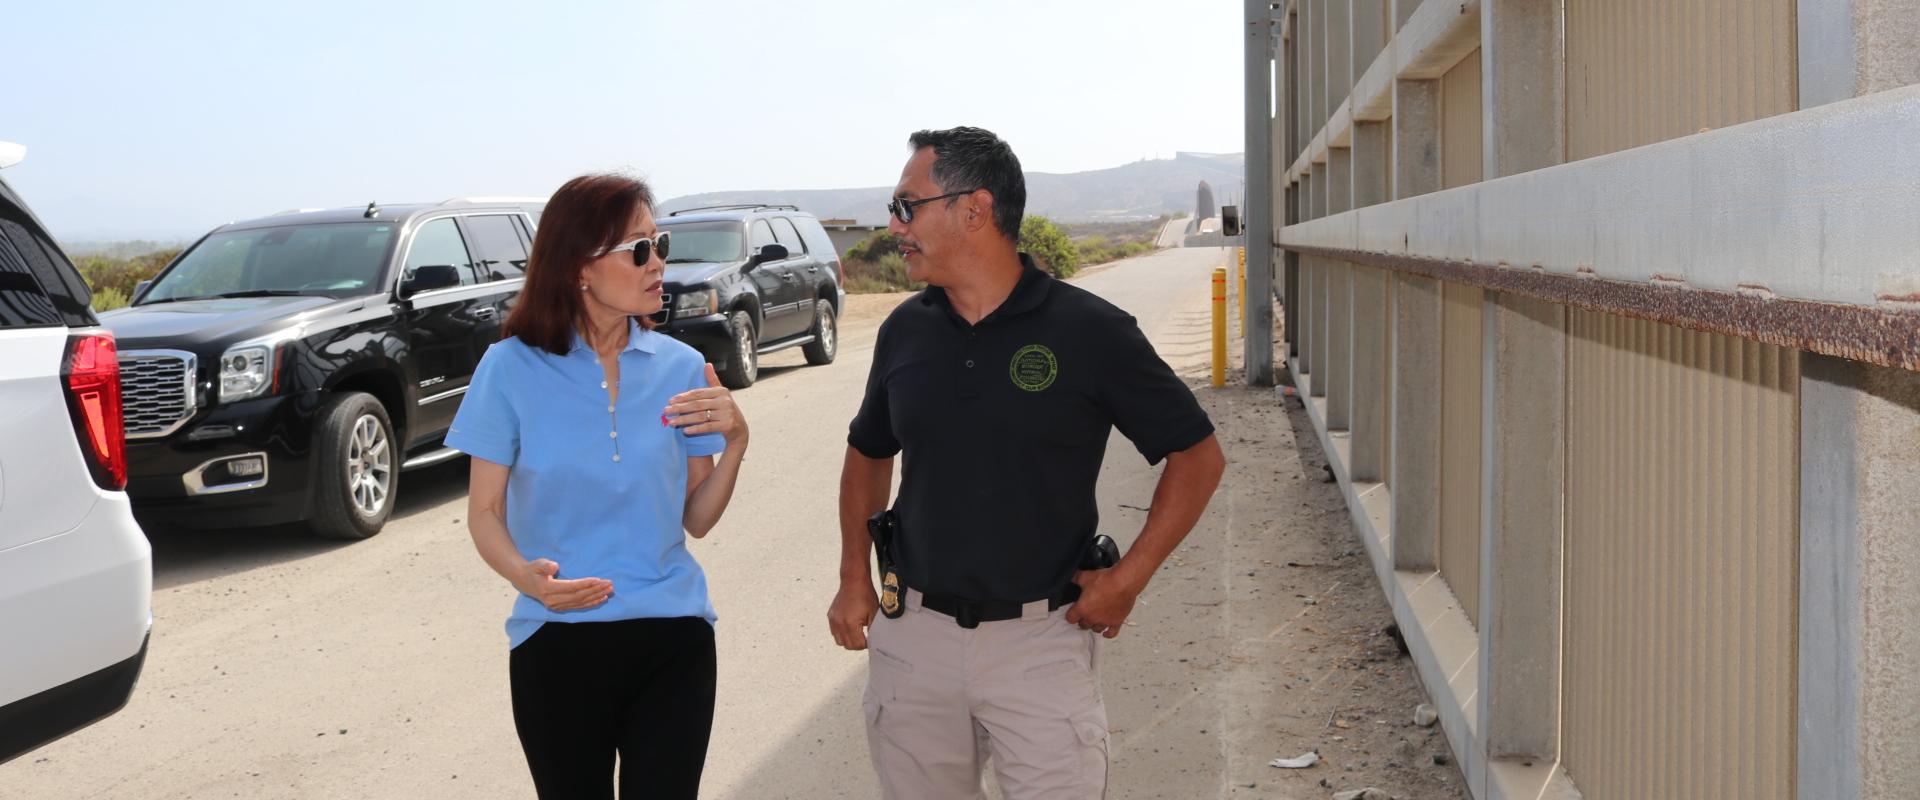 Rep. Steel discusses federal impacts on ground operations with border agent